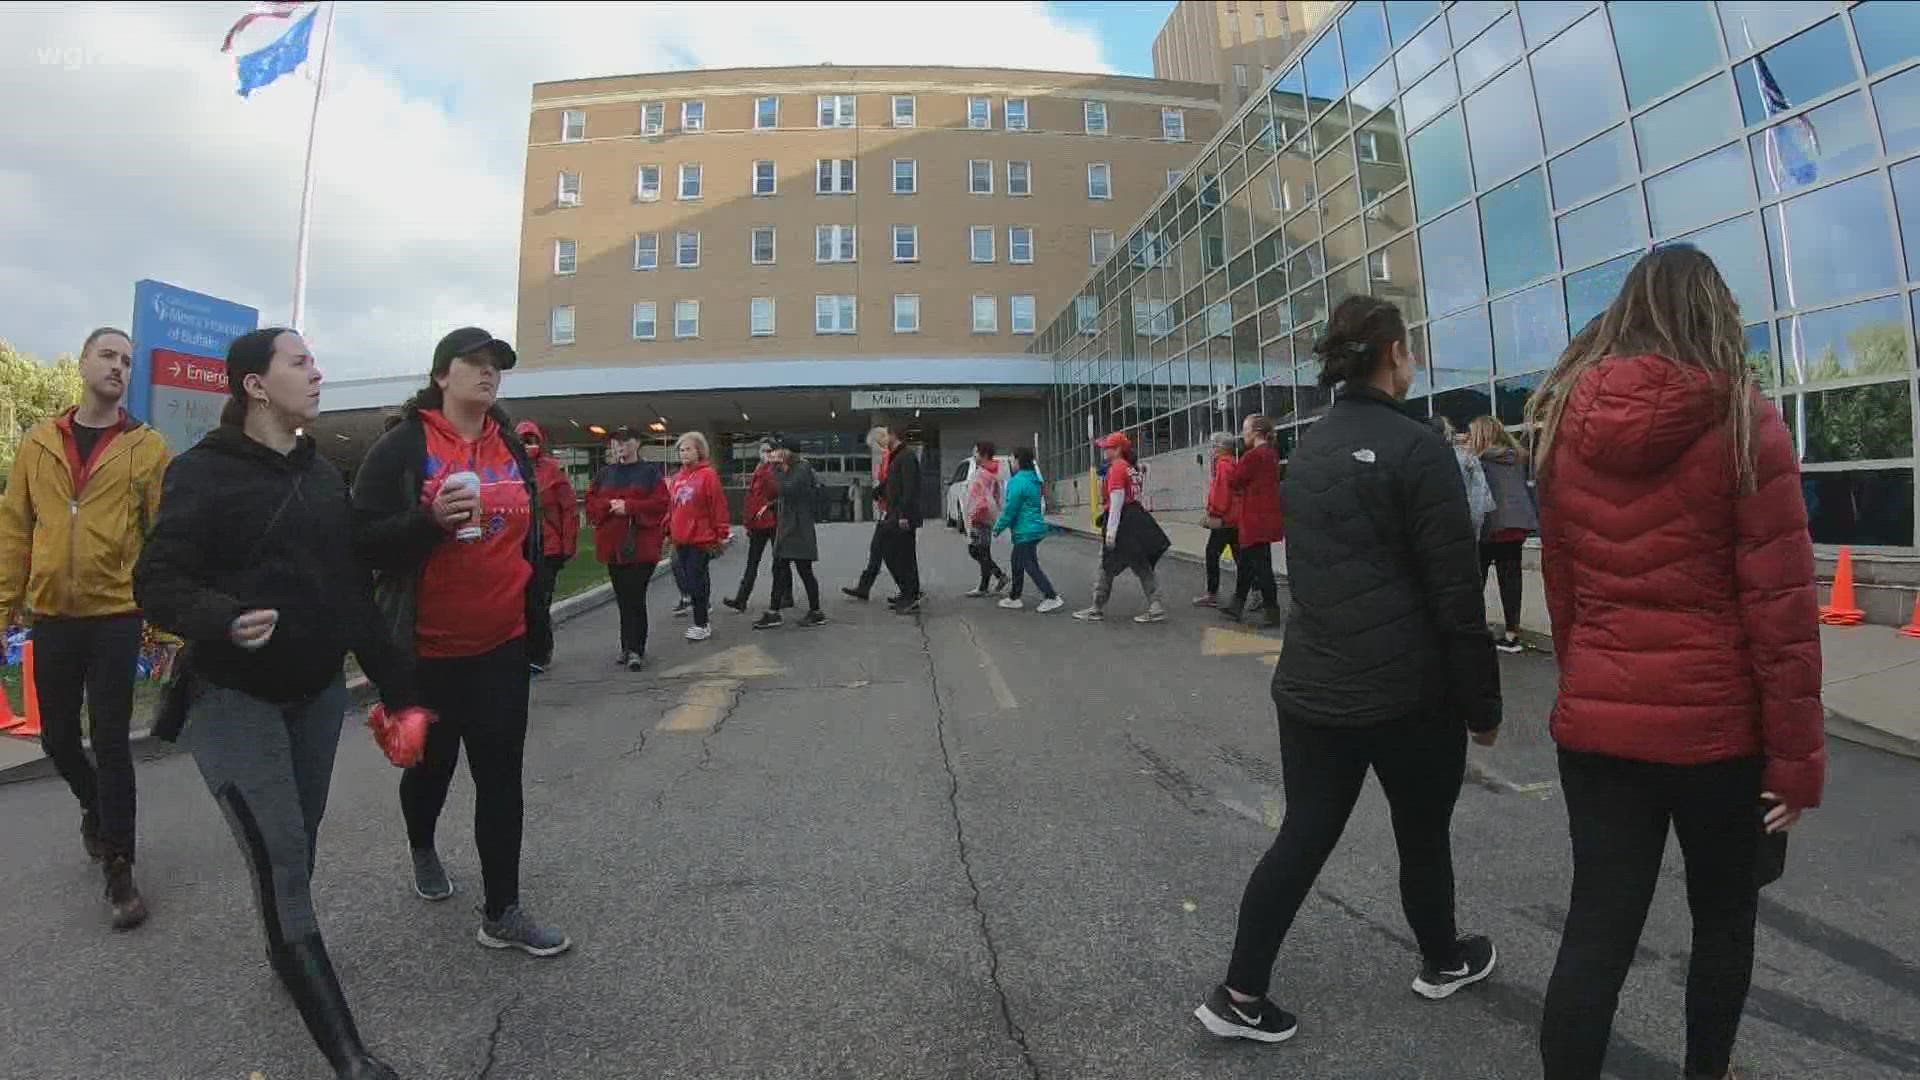 Just about anyone who works in a local hospital or has needed a hospital, has felt the impact from the strike at South Buffalo Mercy.